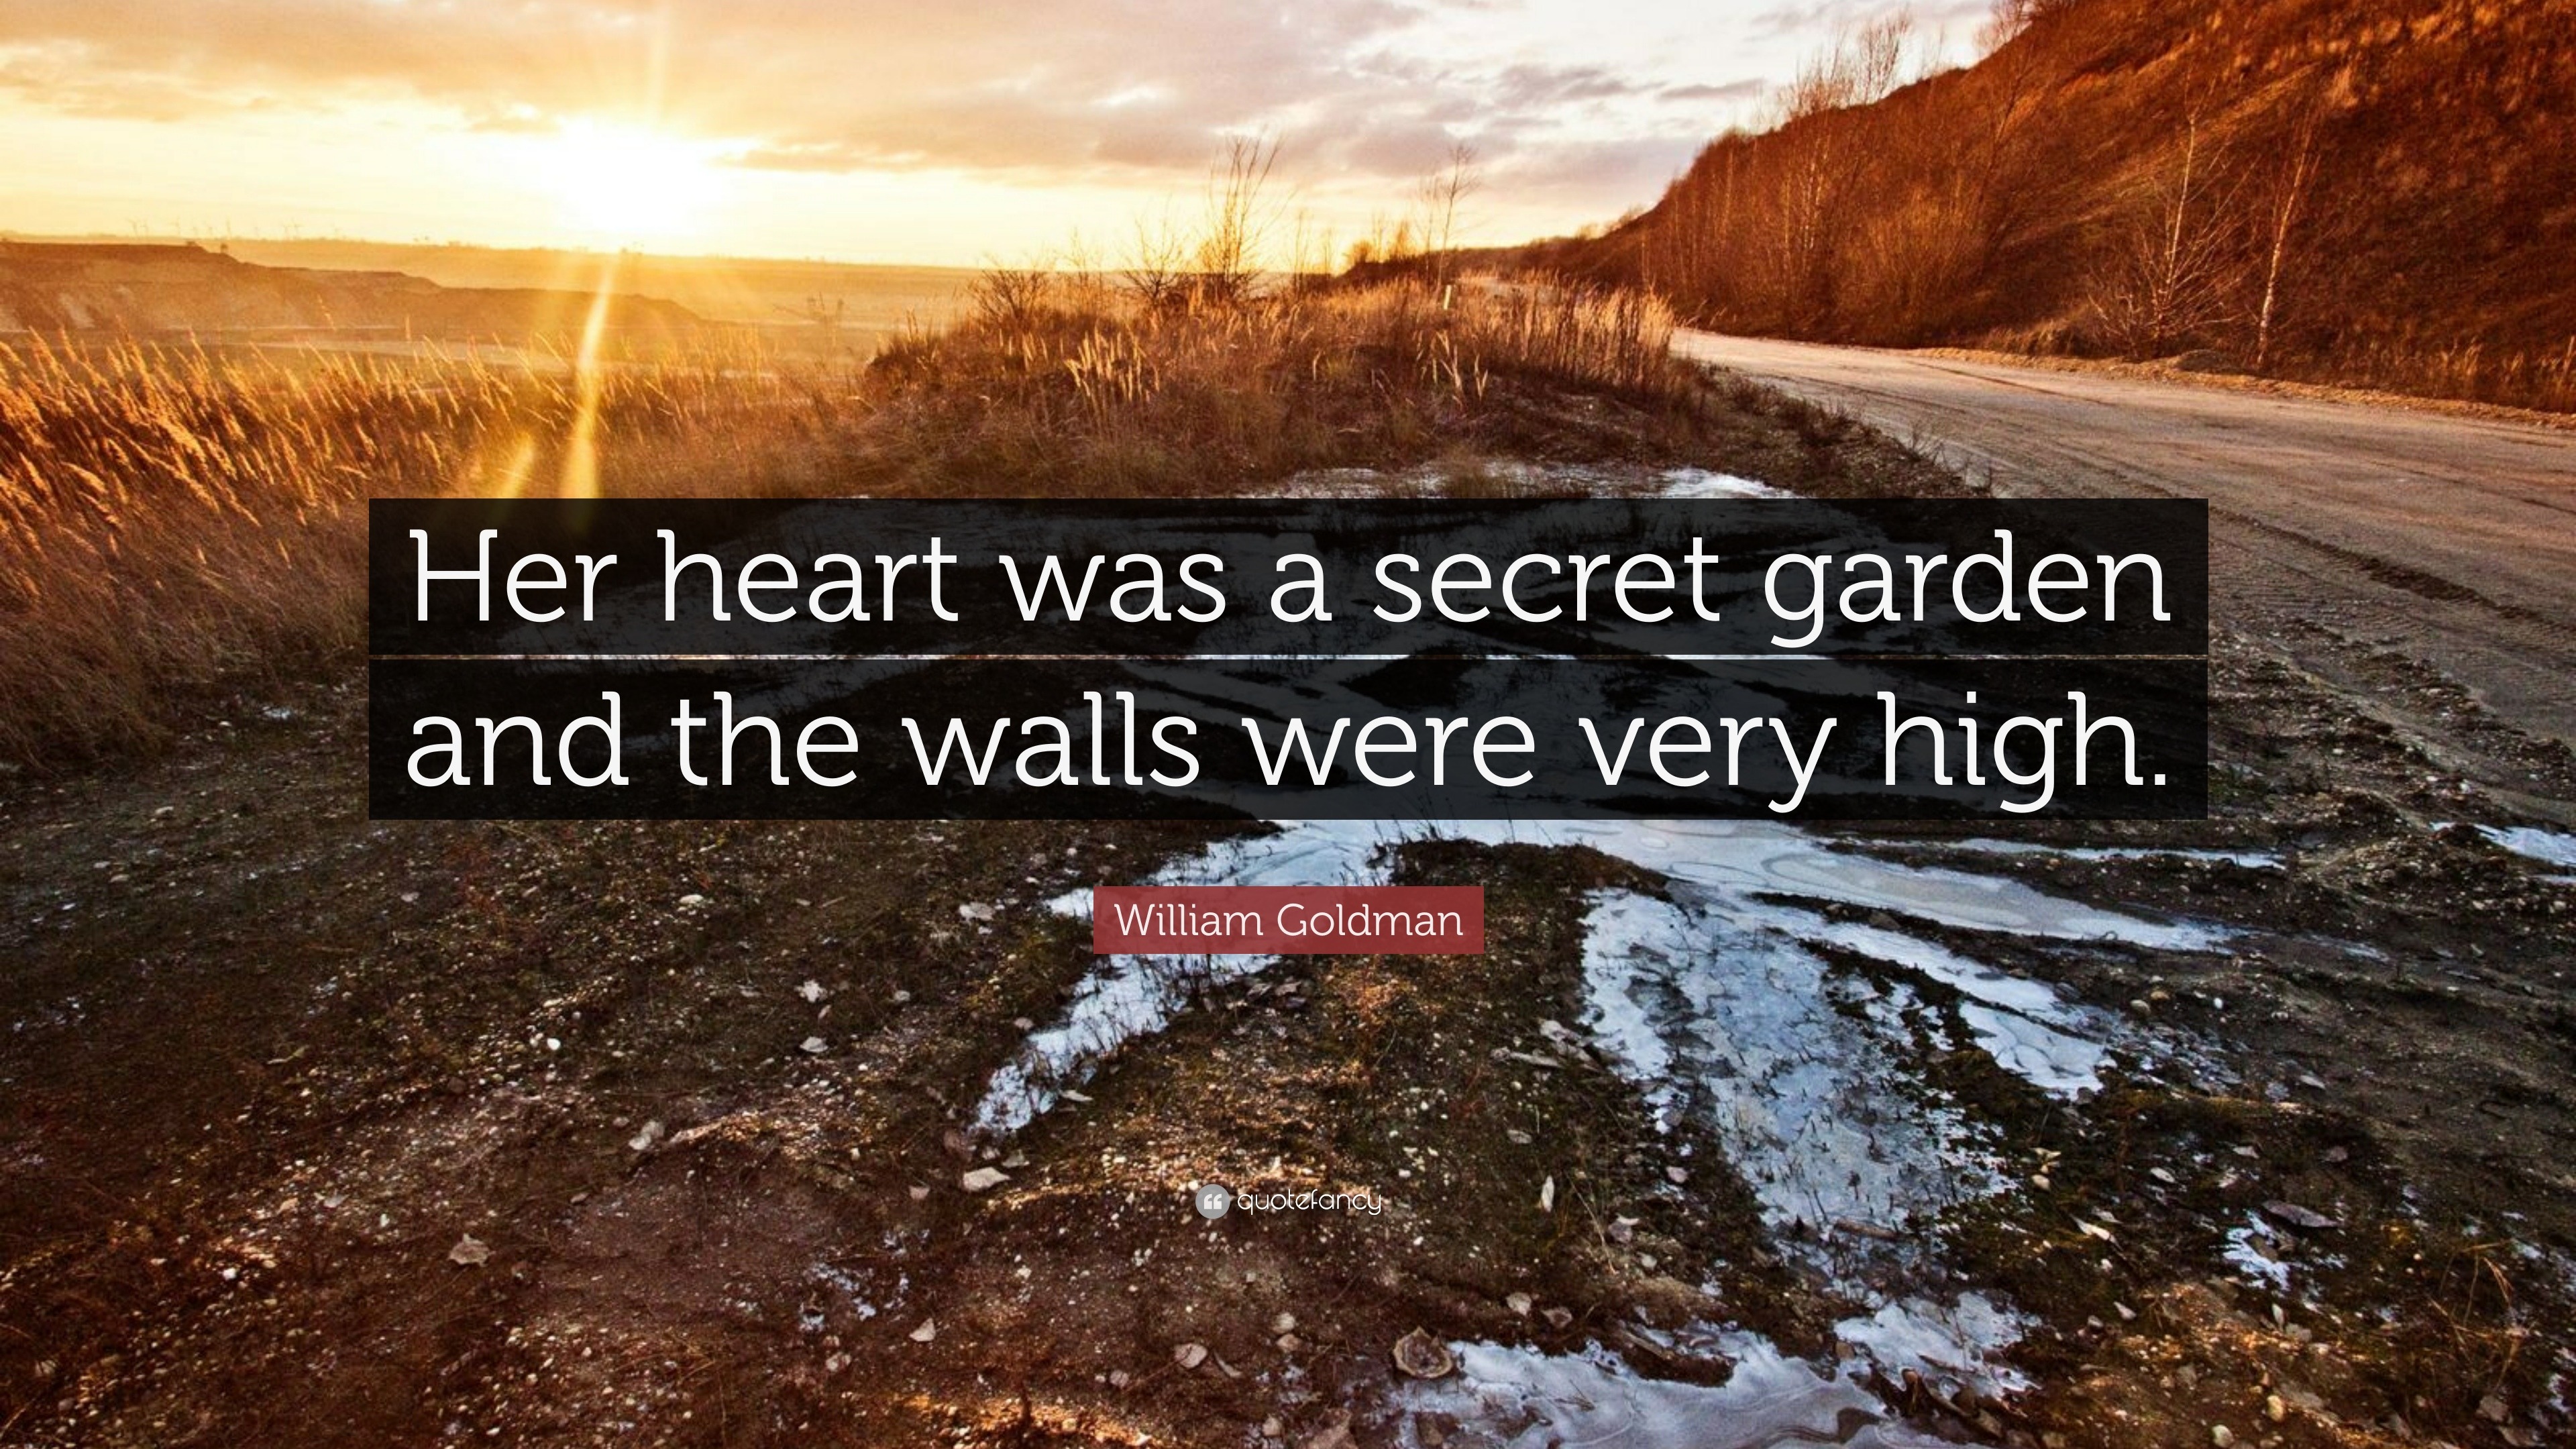 William Goldman Quote: “Her heart was a secret garden and the walls